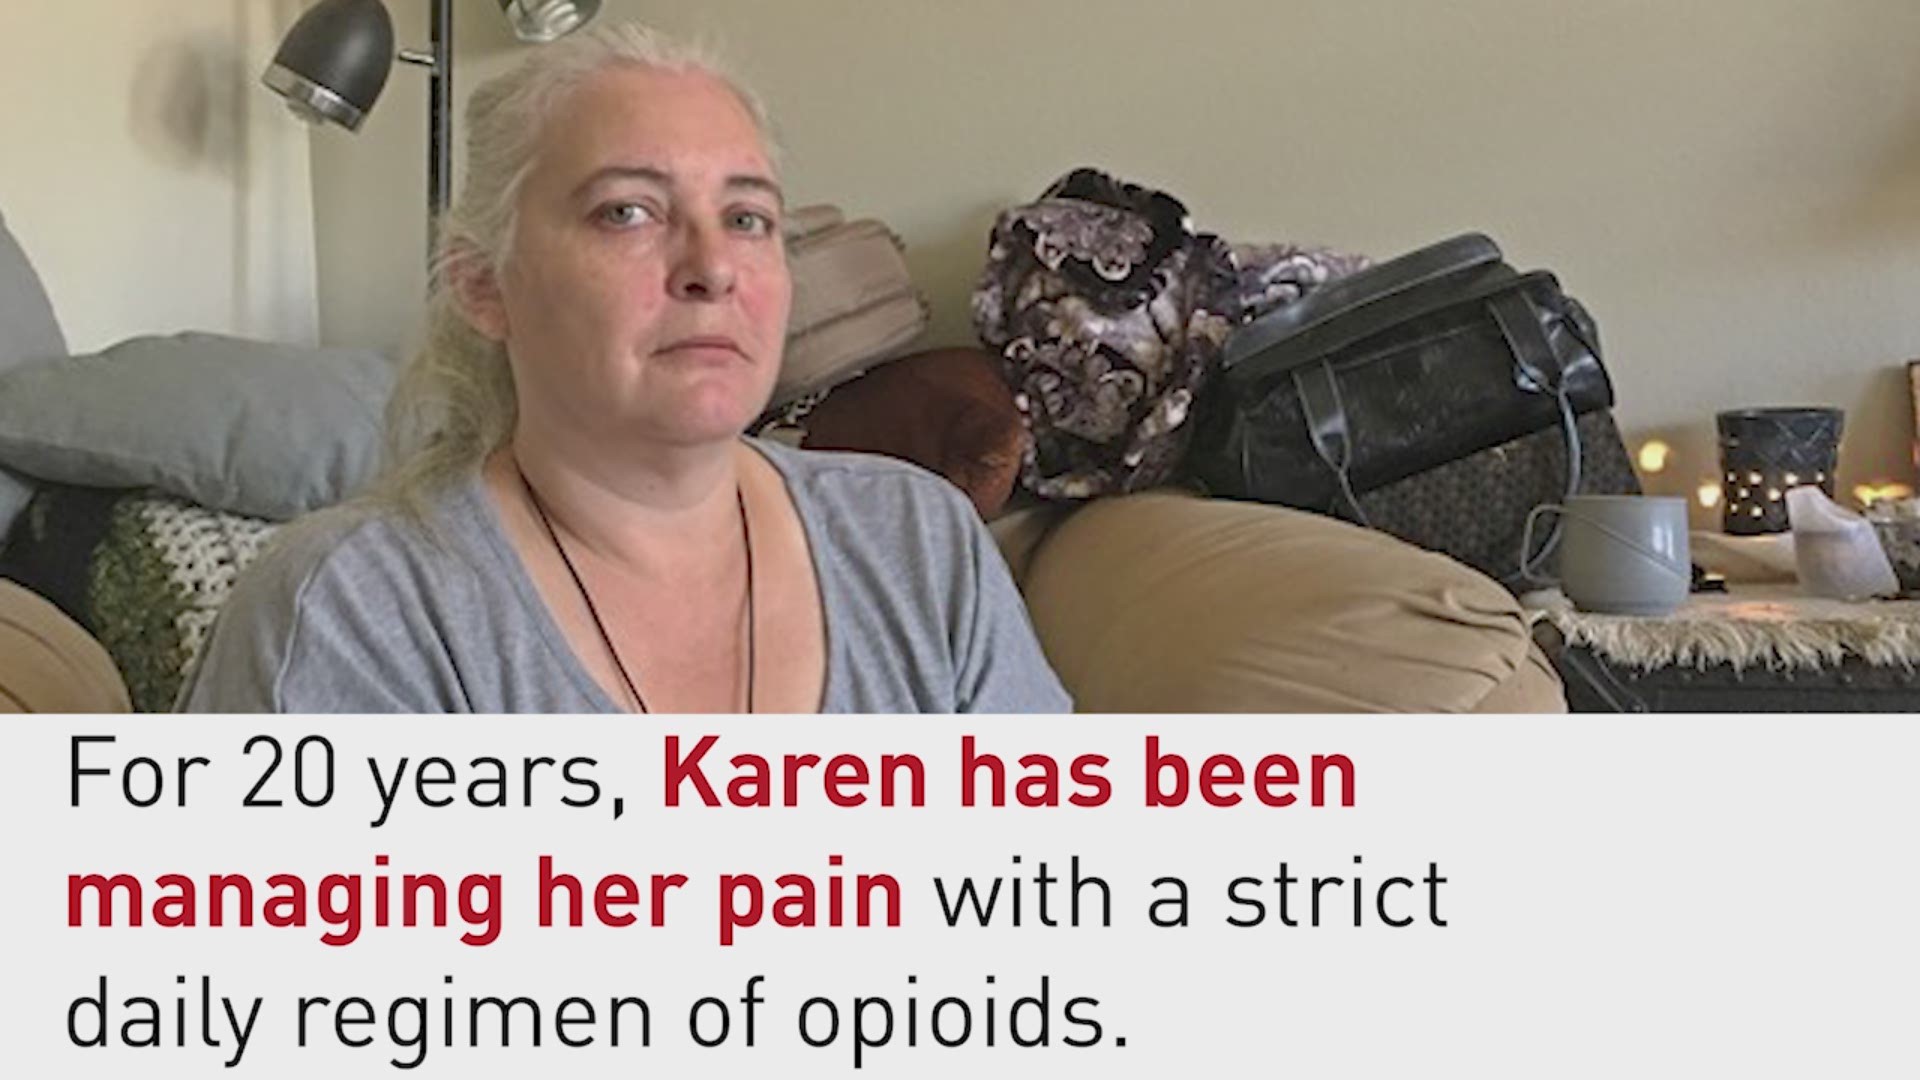 Chronic pain patients fear cut in medication due to new guidelines for opioid prescription drugs